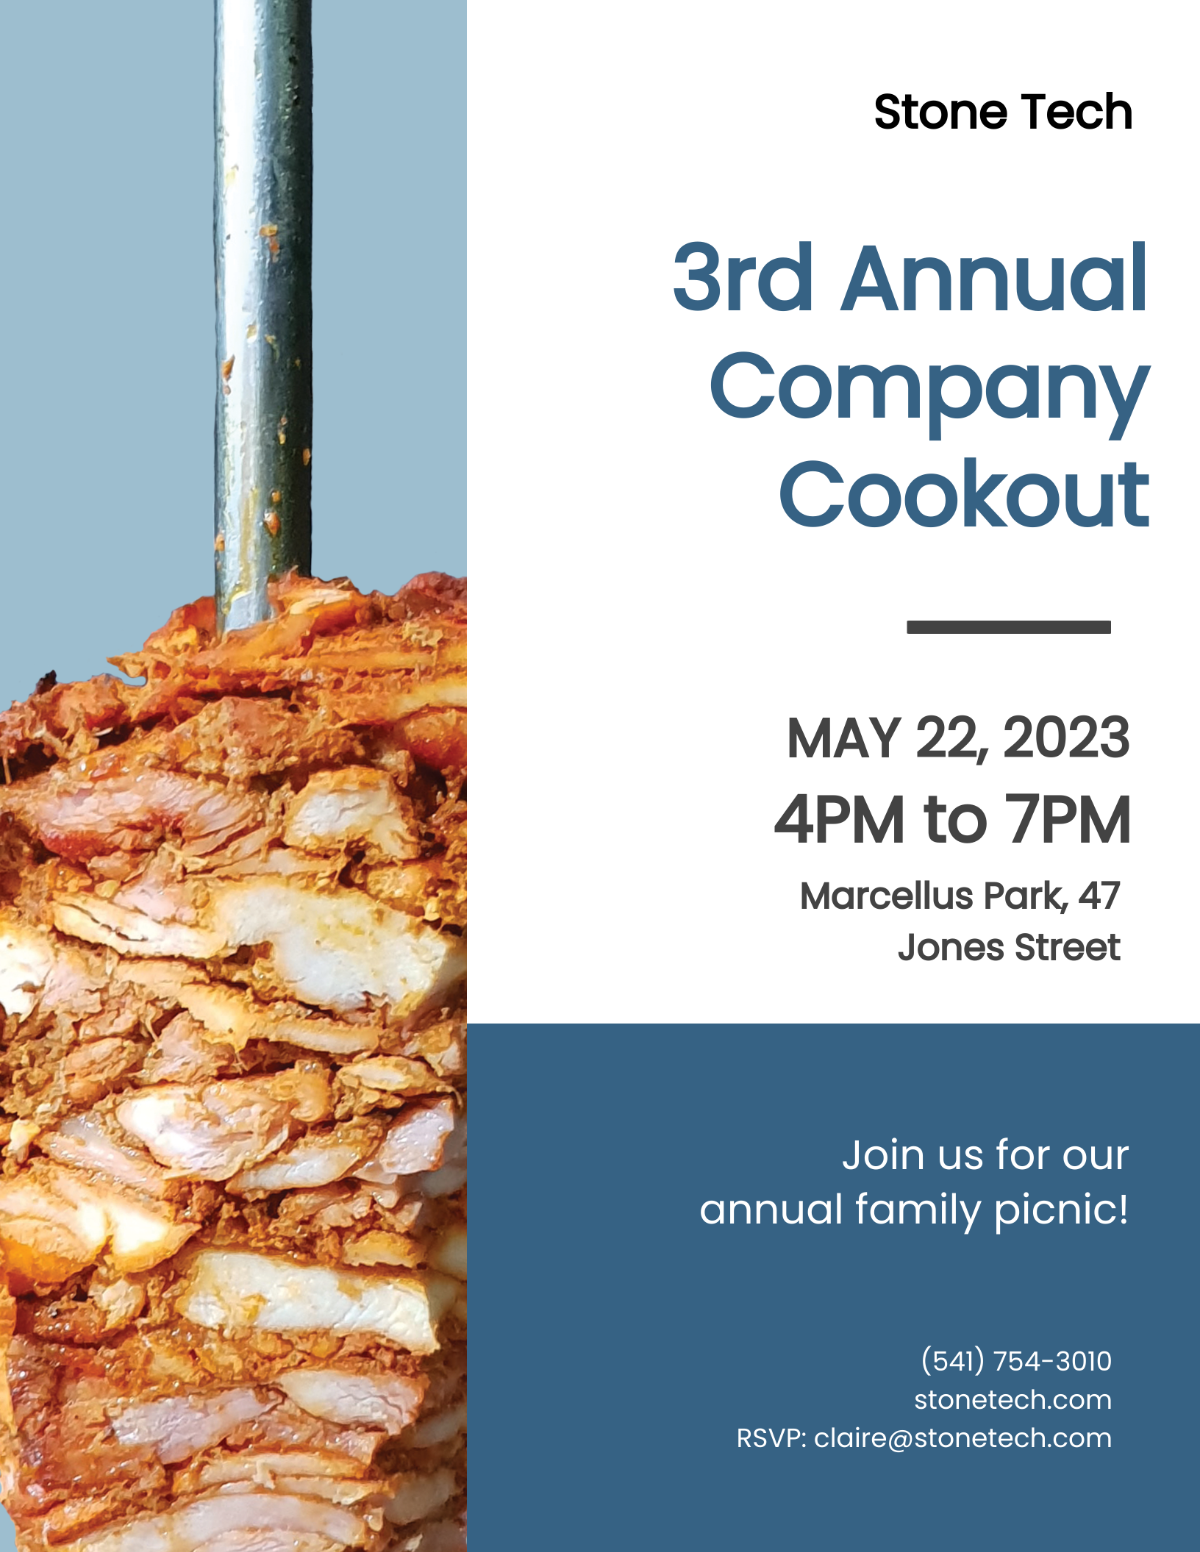 Company Cookout Flyer Template